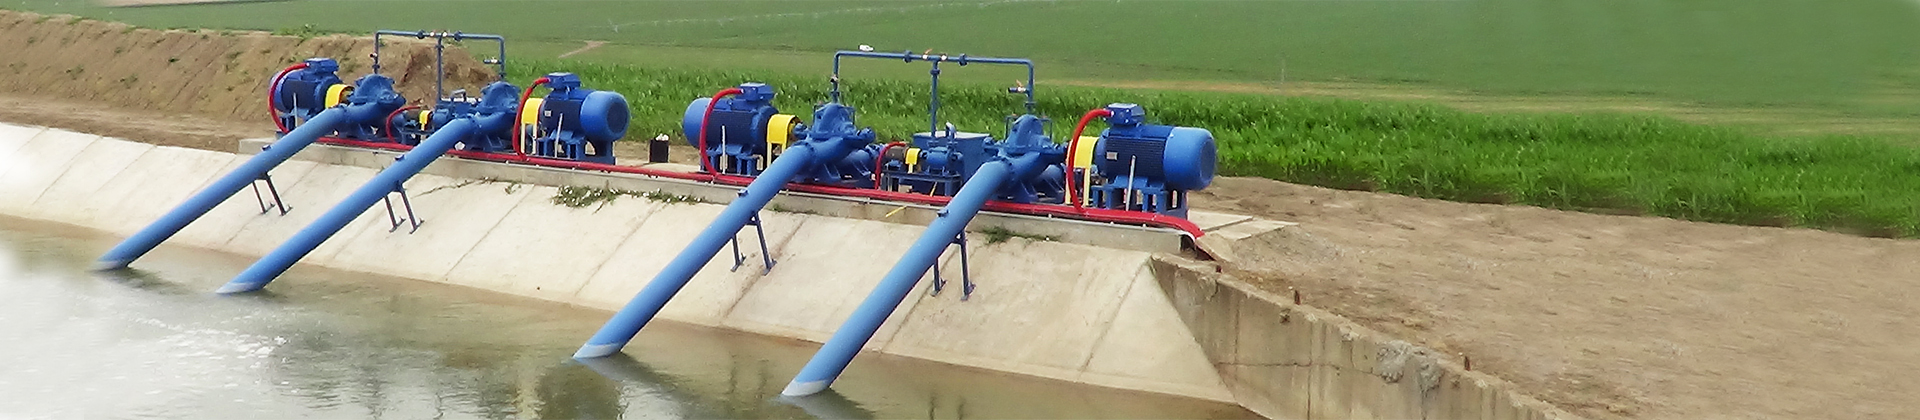 Pumps in a retention pond doing there work to irrigate the farm